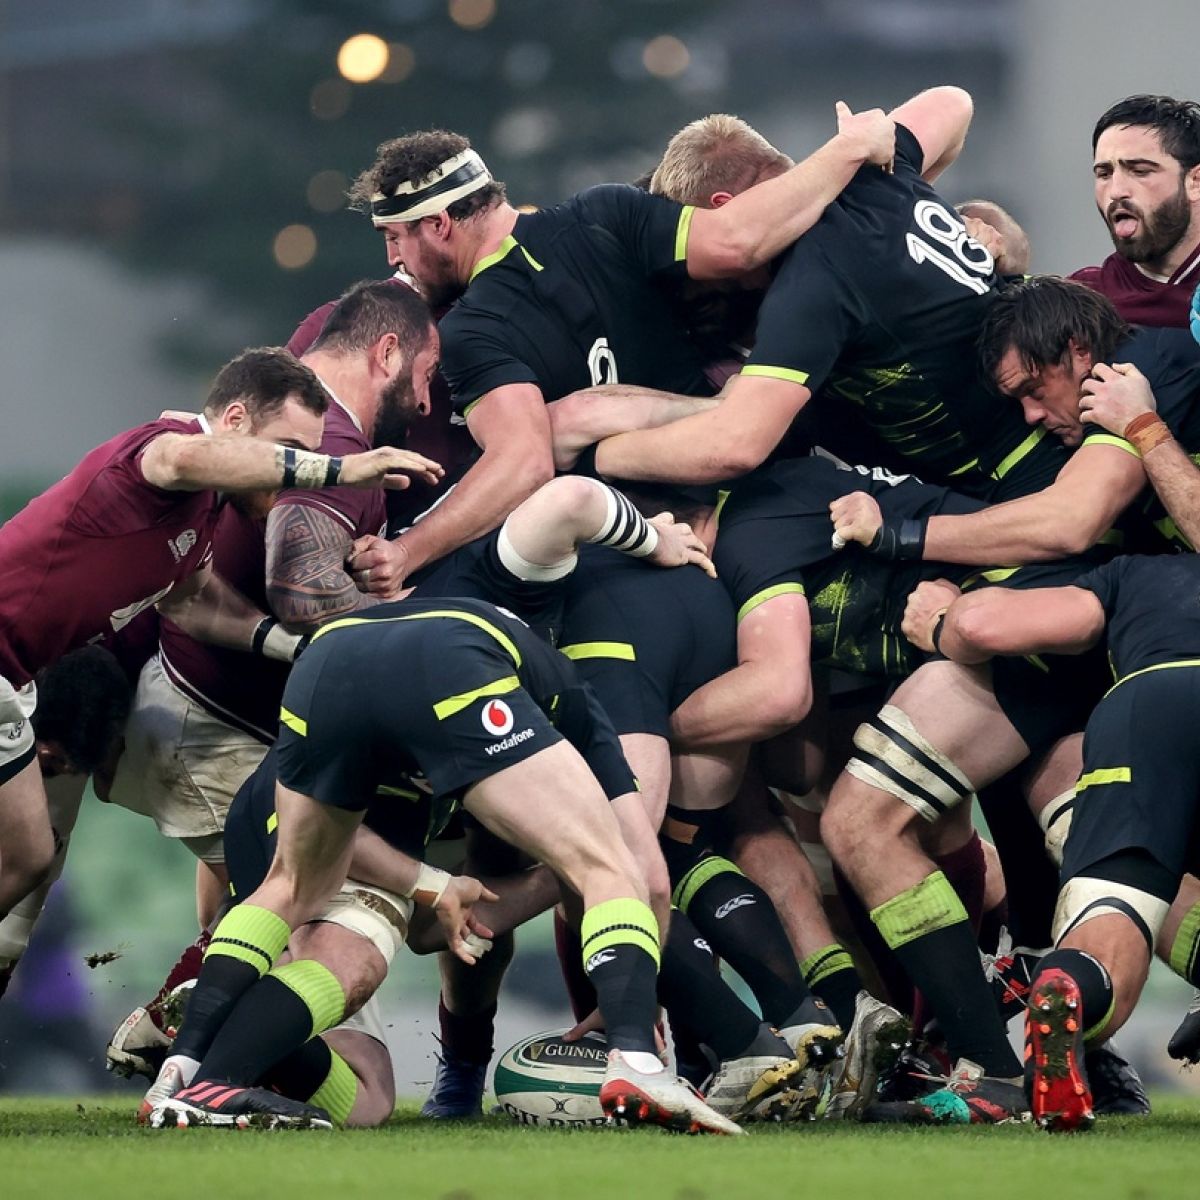 Matt Williams Scrum Stoppages Turning Rugby Into A Boring Spectacle